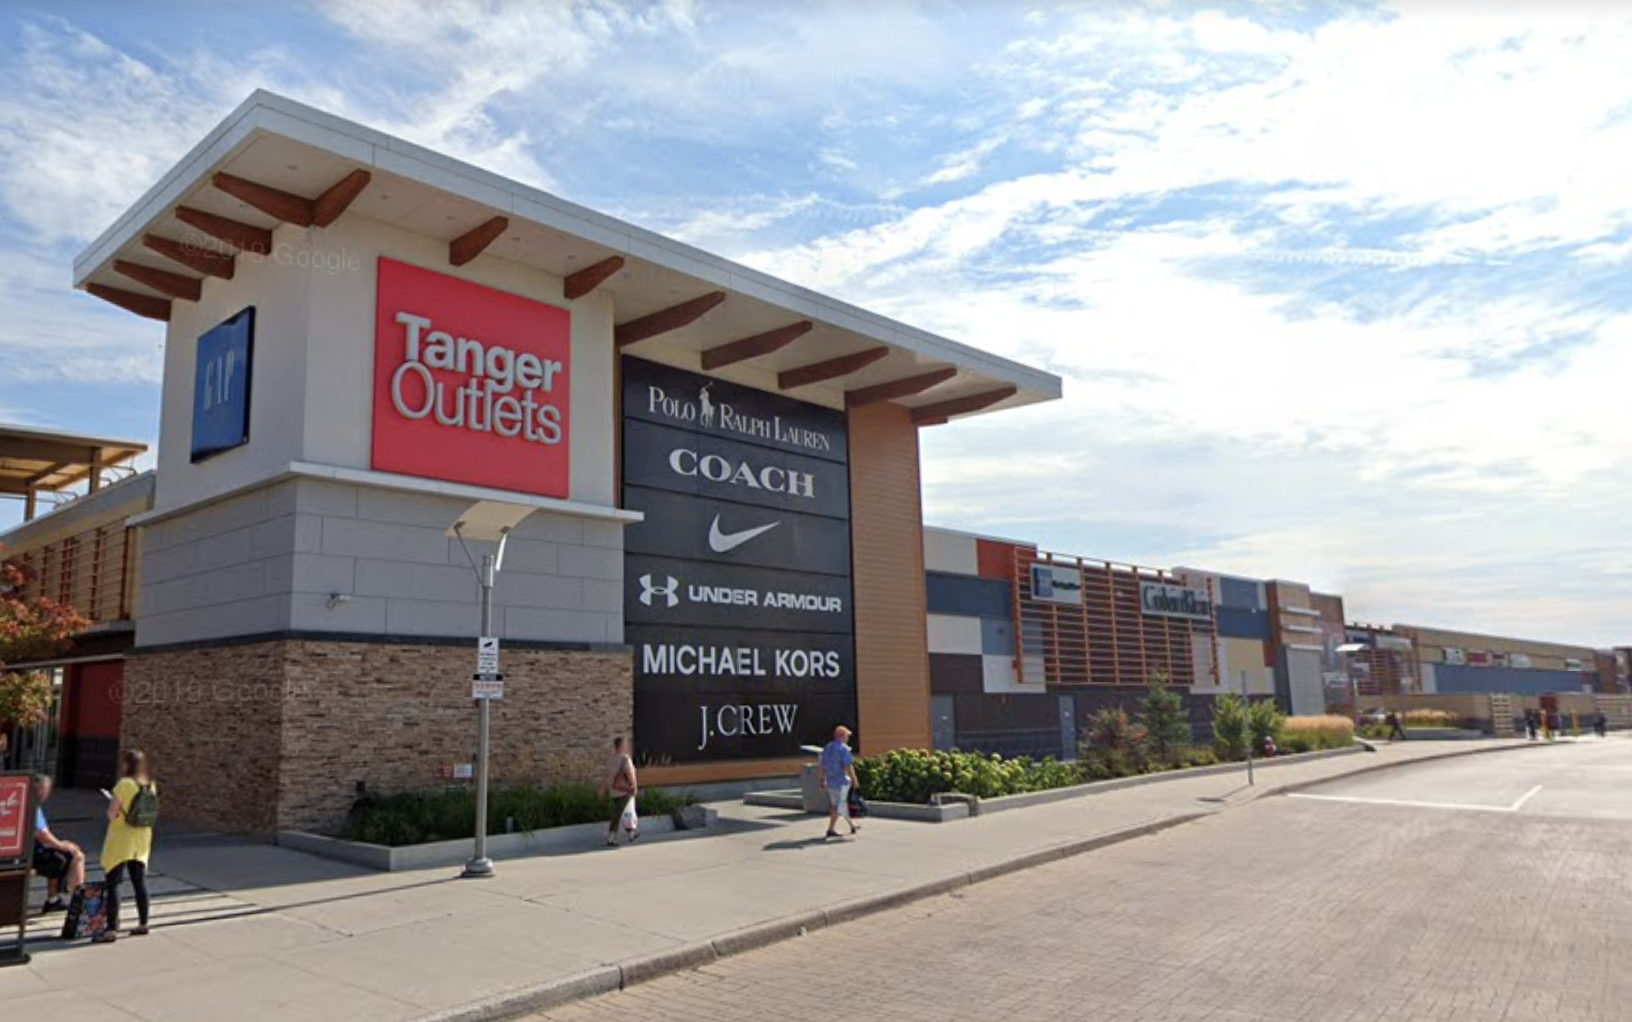 Ottawa's Tanger Outlets cleared for holiday shopping pending